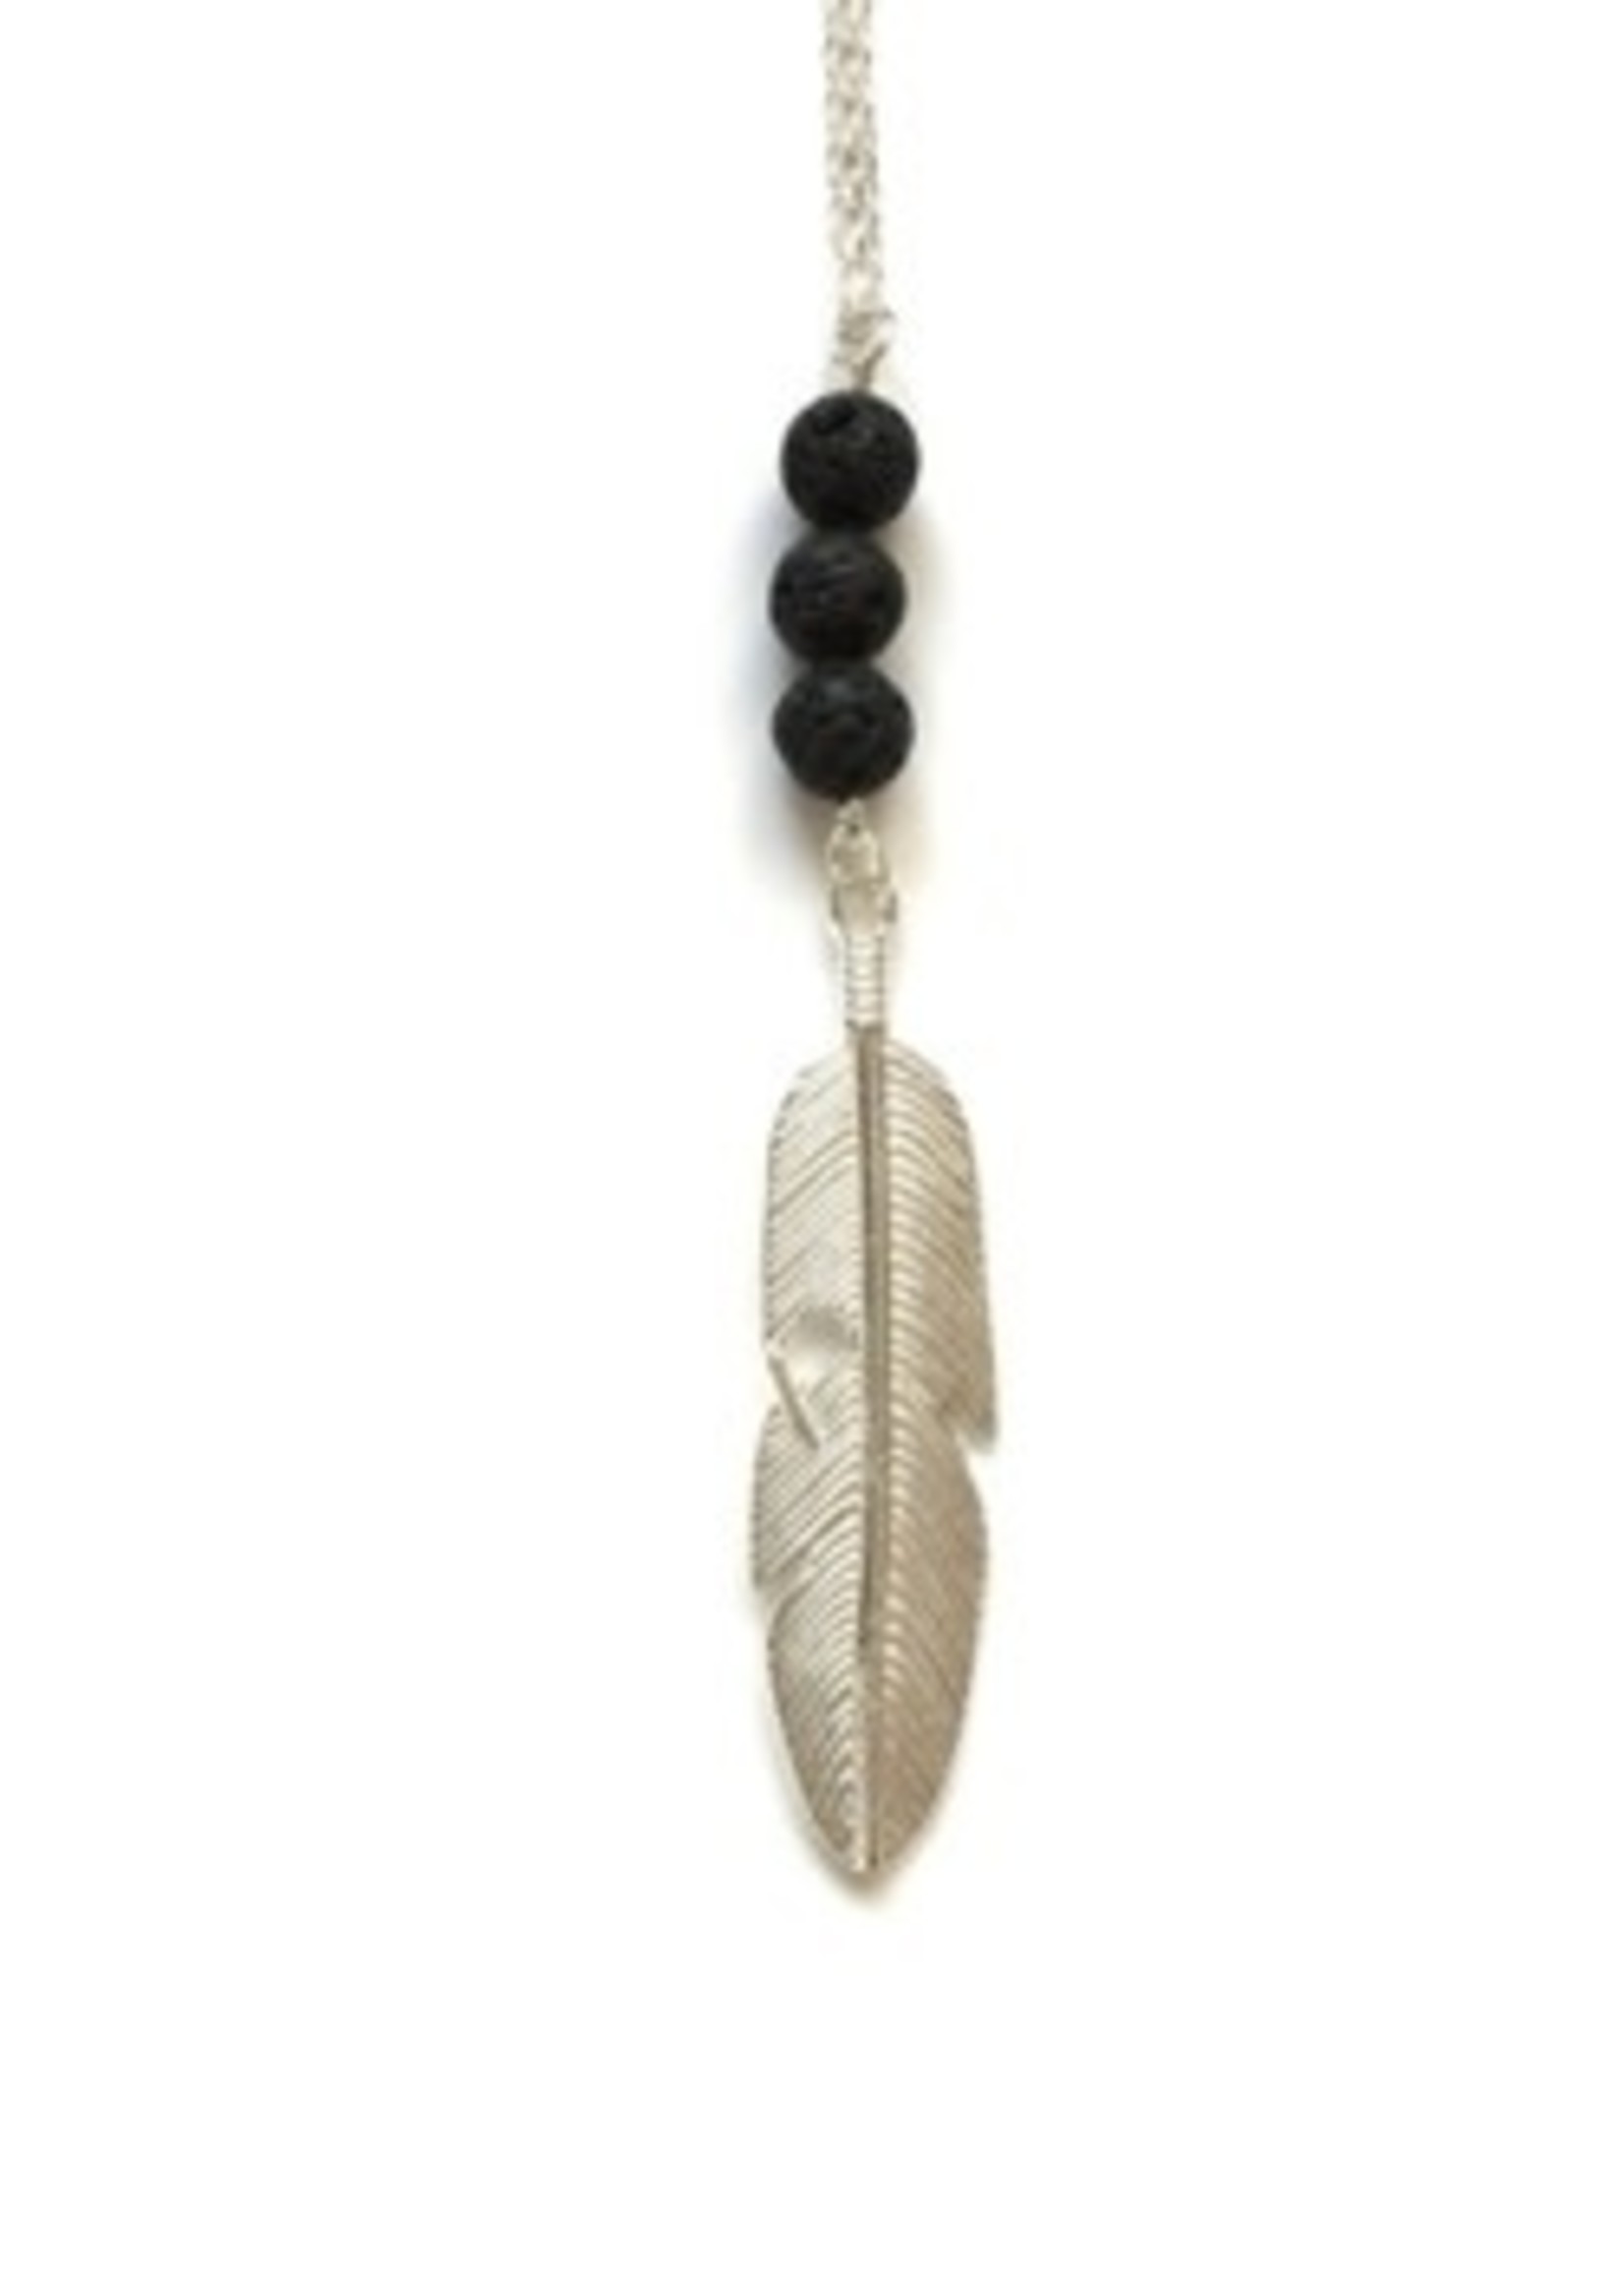 Oily Blends LLC Feather Lava Stone Diffuser Necklace